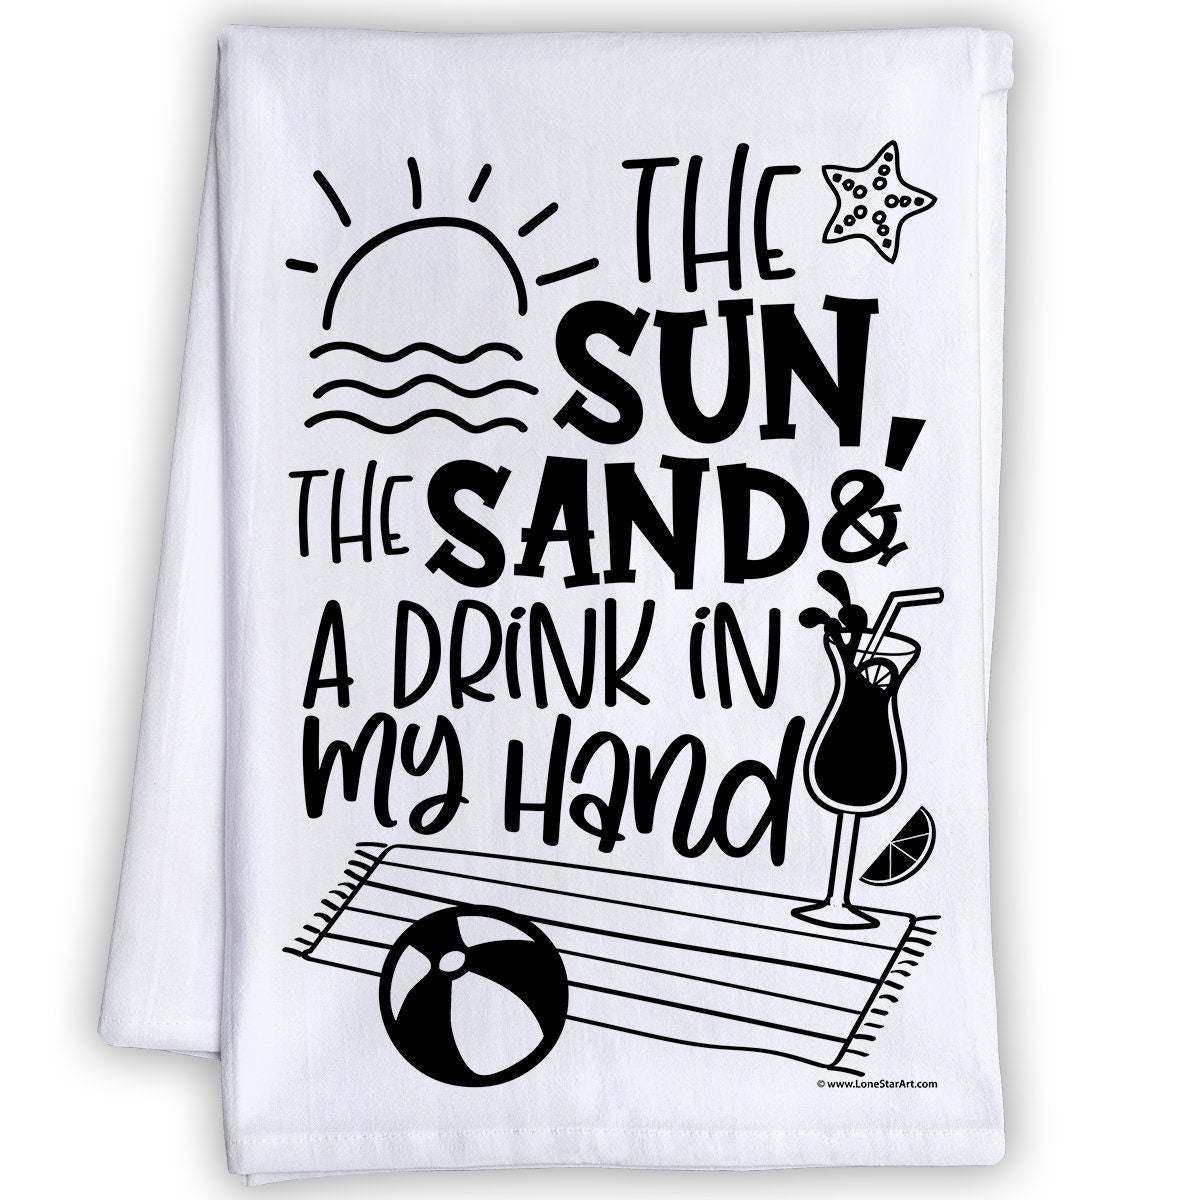 Funny Kitchen Tea Towels -The Sun,The Sand & a Drink in my Hand-Humorous Flour Sack Dish Towel - Housewarming Gift/Beach House Kitchen Decor Lone Star Art 